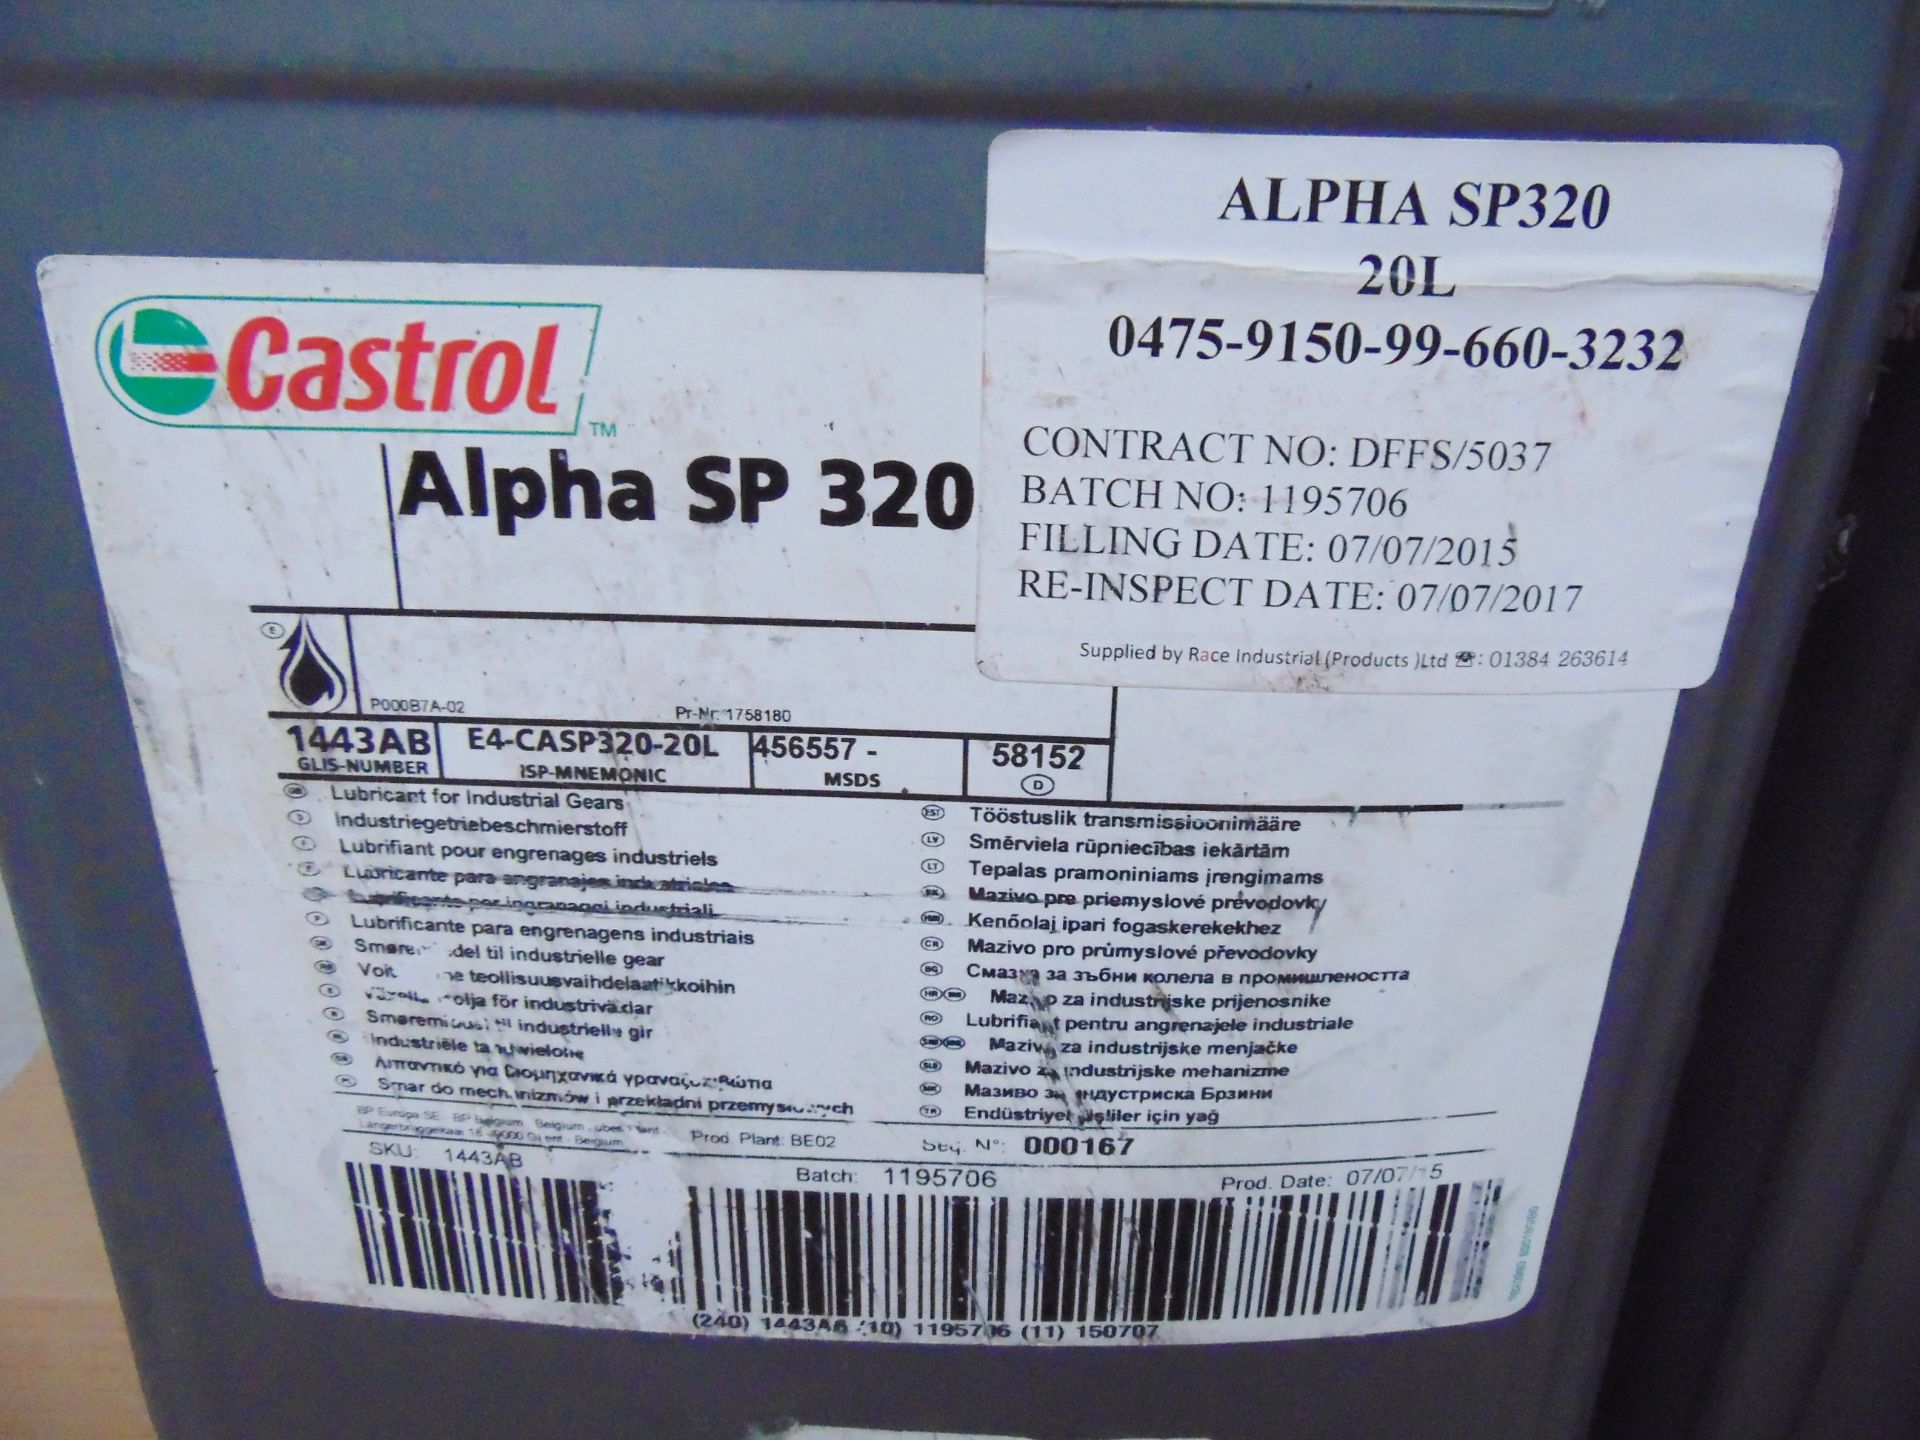 3 x Unissued Tubs of Castrol Alpha SP 320 20L Industrial Gear Oil - Image 3 of 4